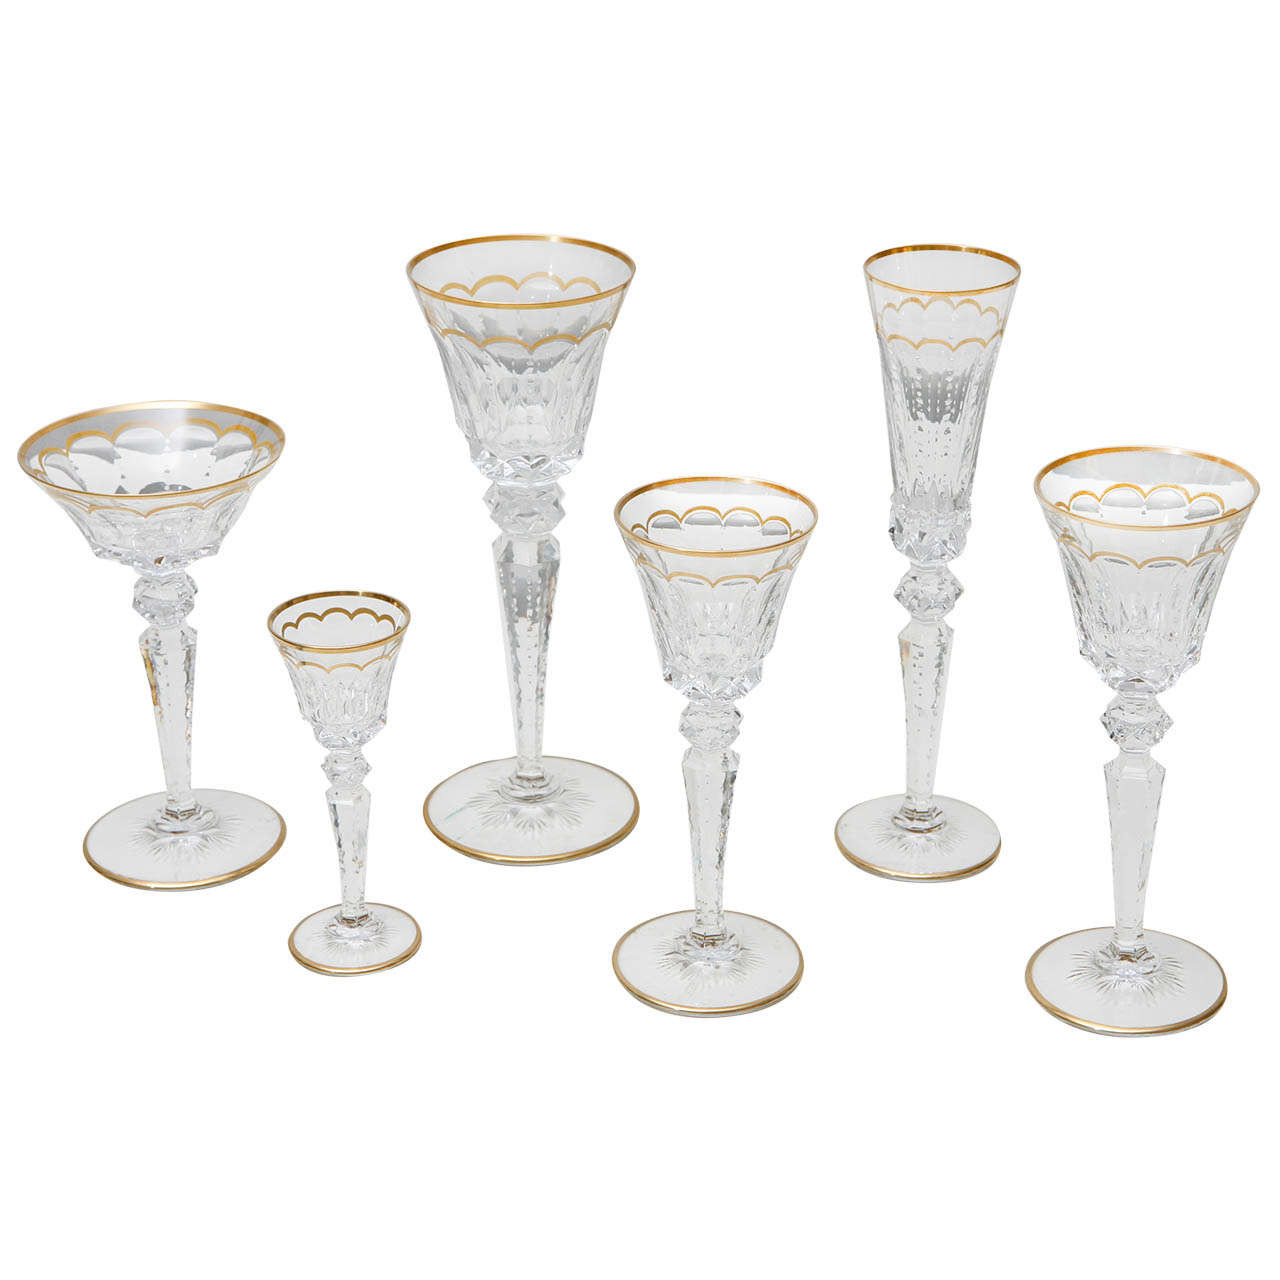 15 Fabulous St Louis Crystal Vase 2024 free download st louis crystal vase of crystal set of 16 lausitzer stem glasses with colored overlay cut to with saint louis set of 175 cut crystal glasses